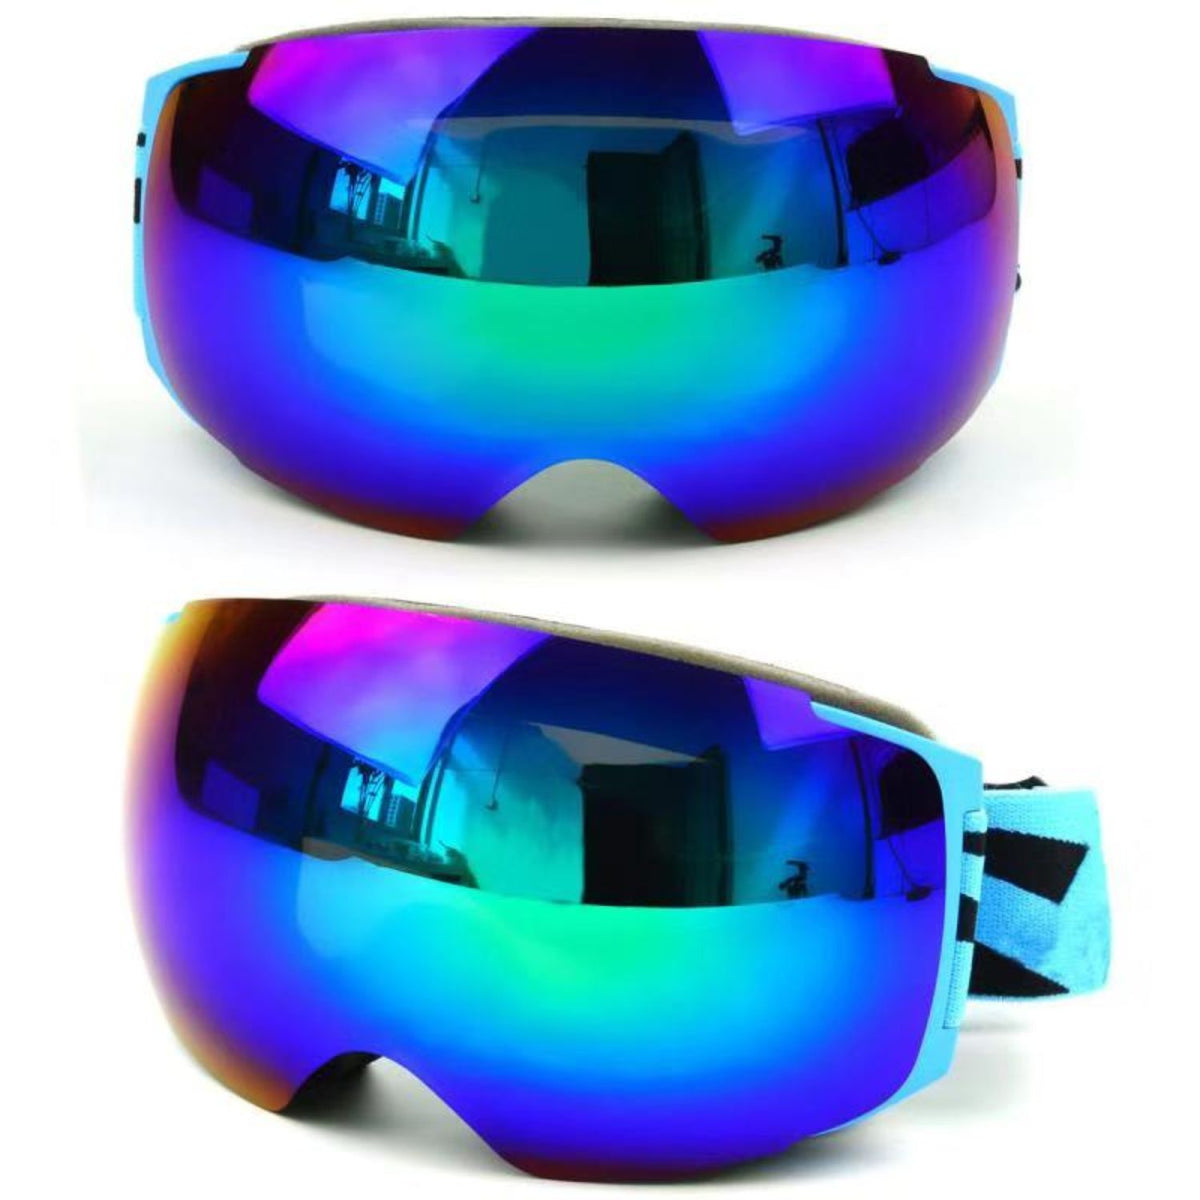 SG02 - Outdoor Ski Snowboard Goggles for Men and Women UV Protection - Iris Fashion Inc. | Wholesale Sunglasses and Glasses